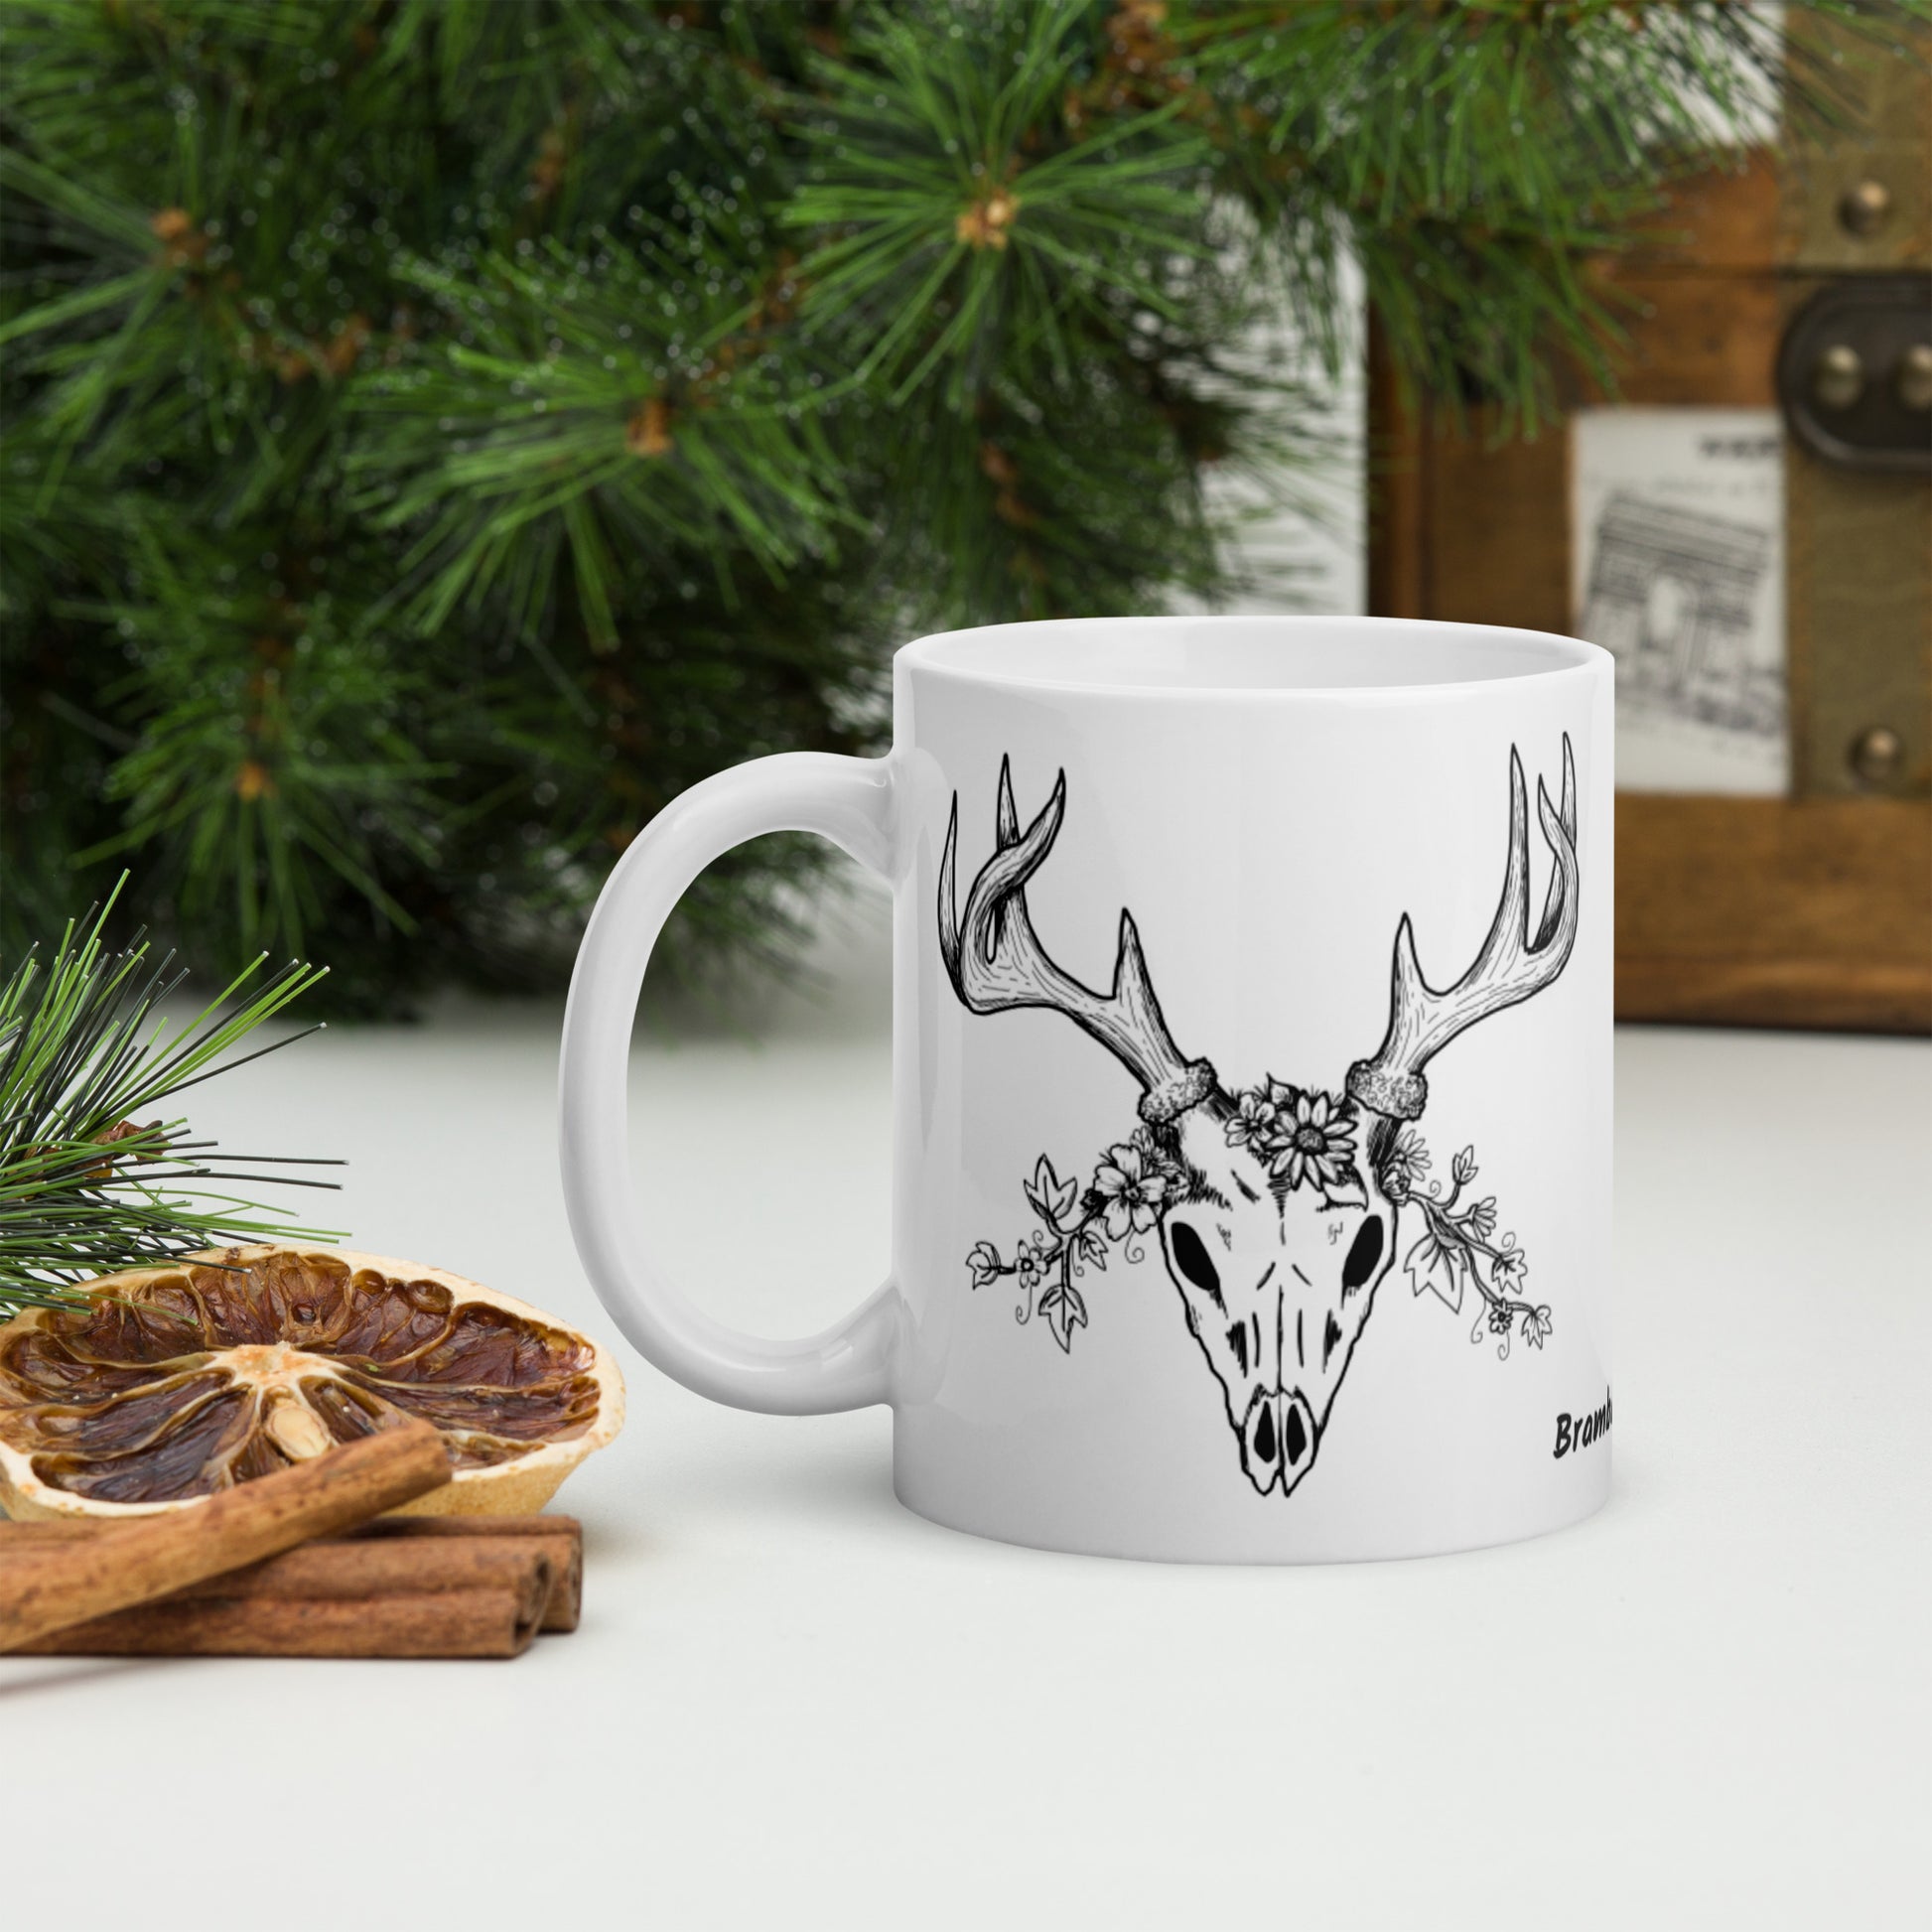 11 oz white ceramic mug. Features a double-sided hand illustrated image of a deer skull wreathed in flowers. Shown on tabletop by pine branches, dried orange slice, and cinnamon sticks.